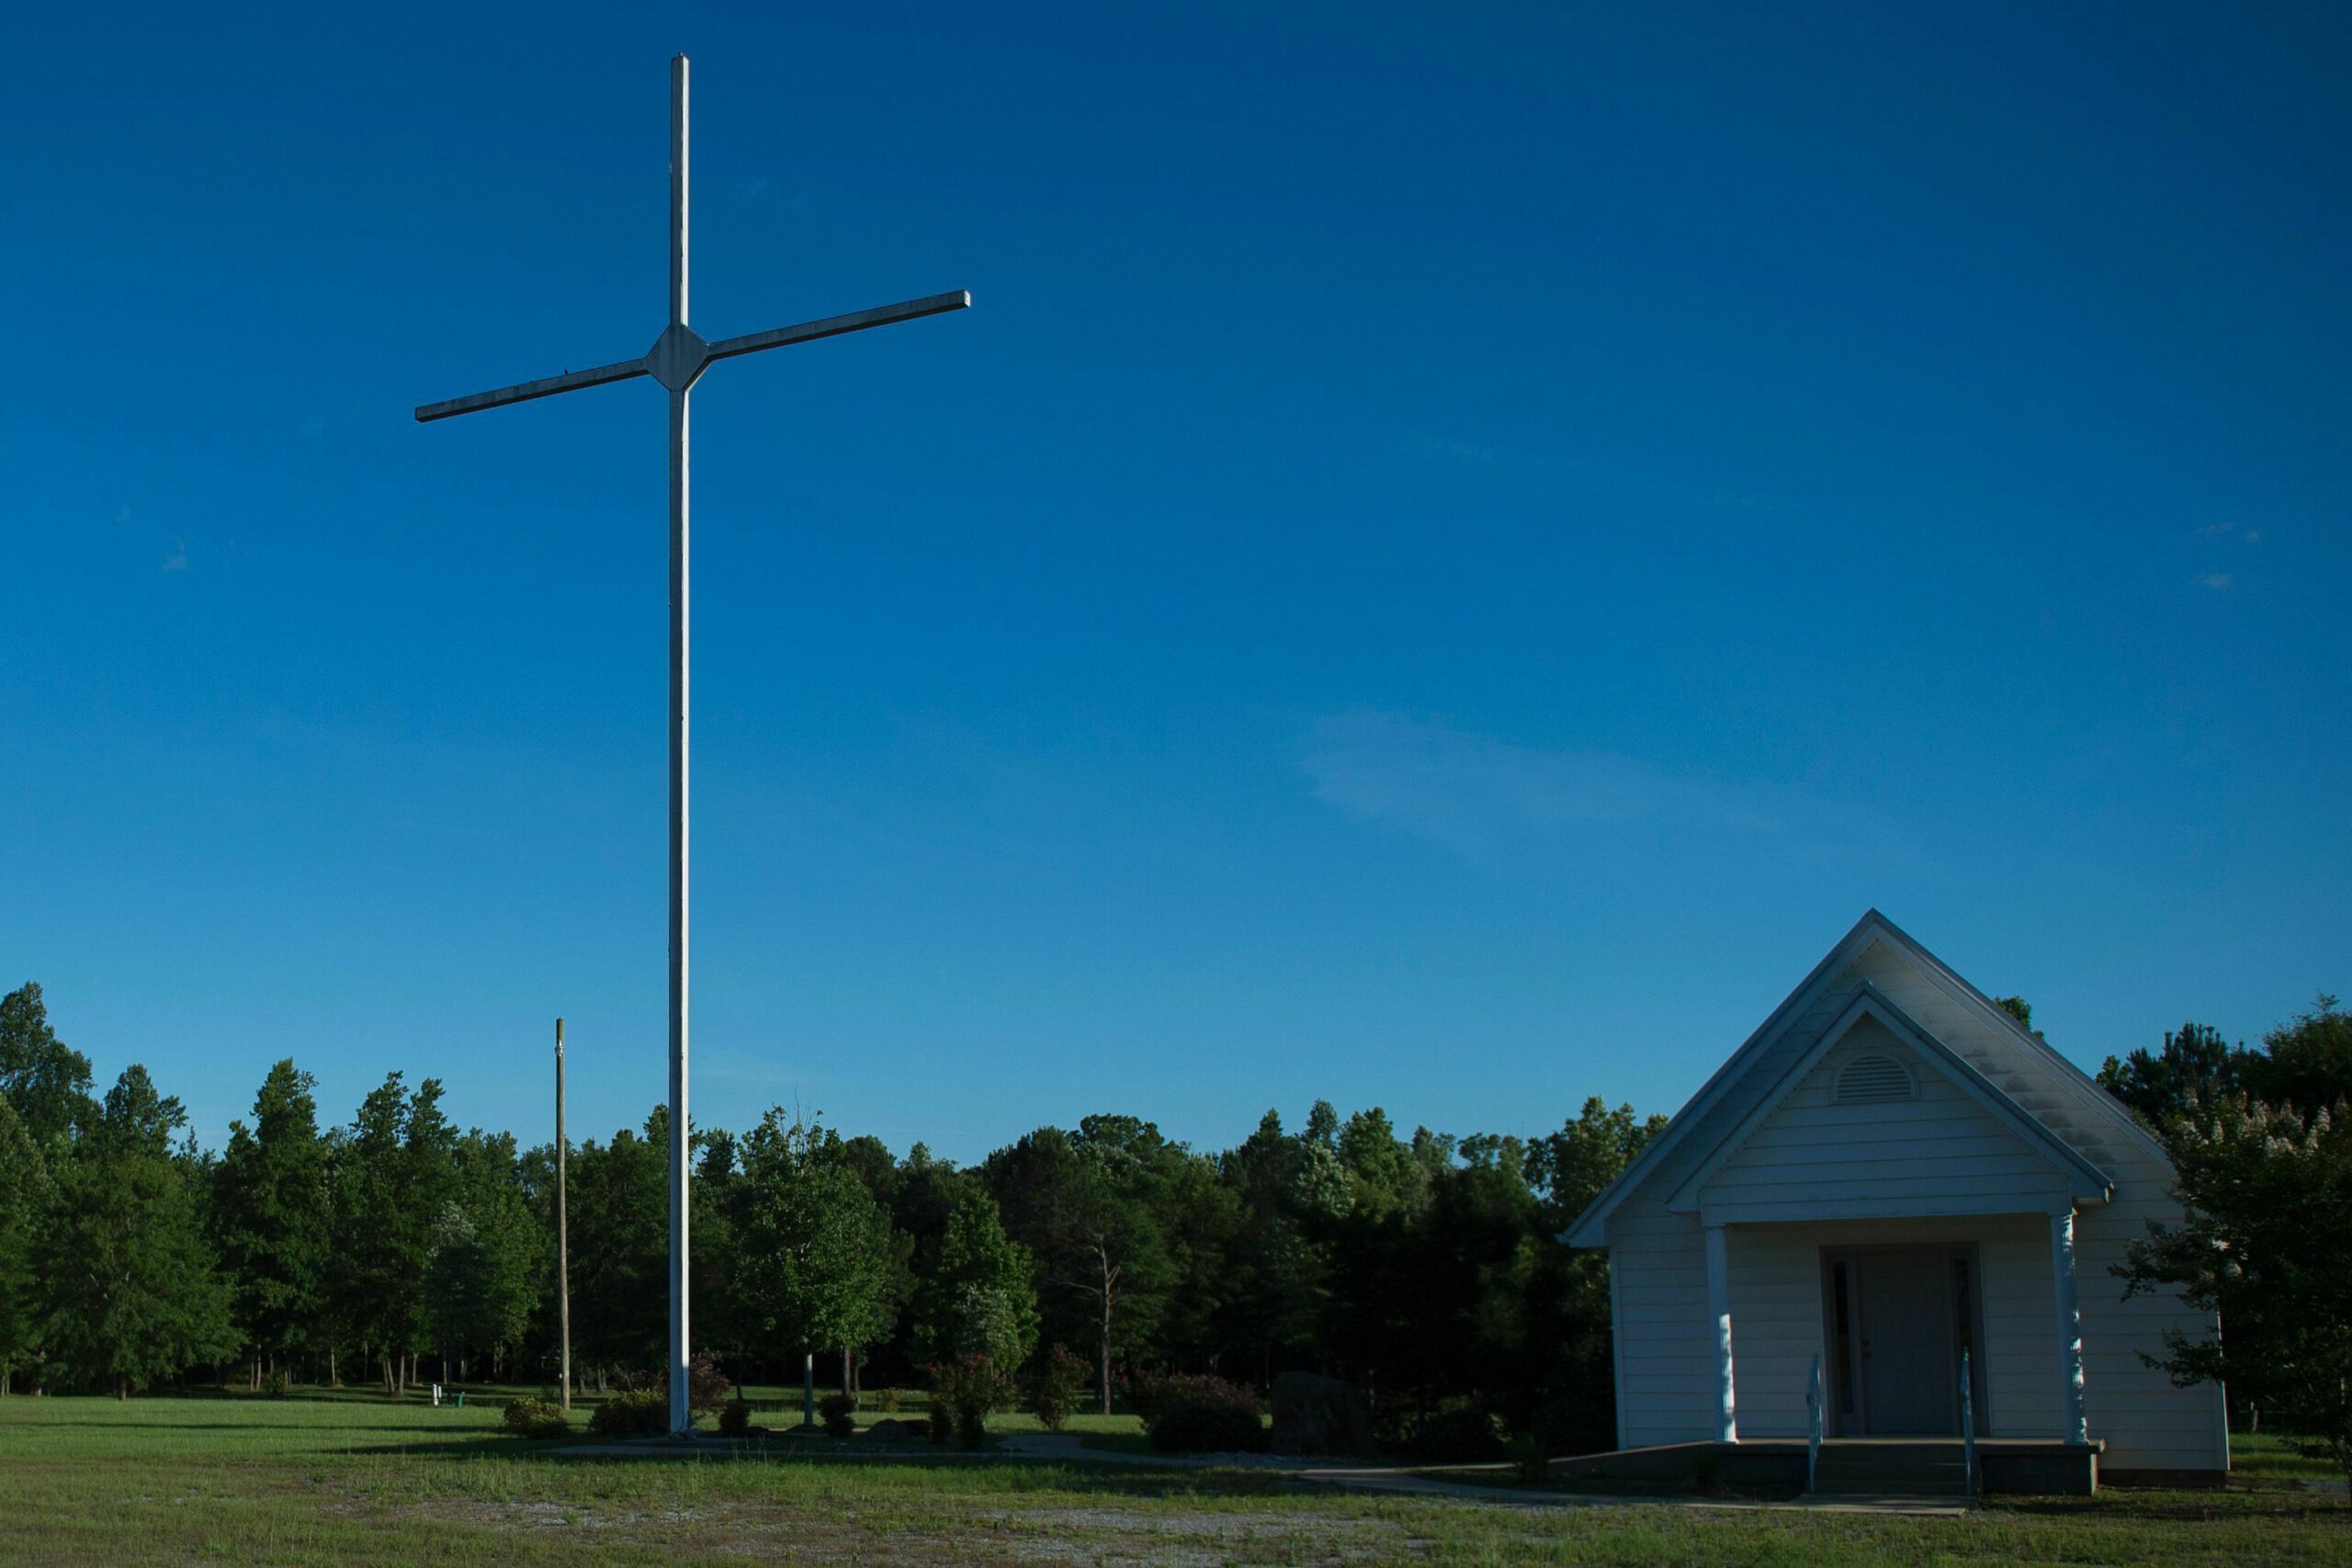 Christian nationalism's support is strongest in rural, conservative states